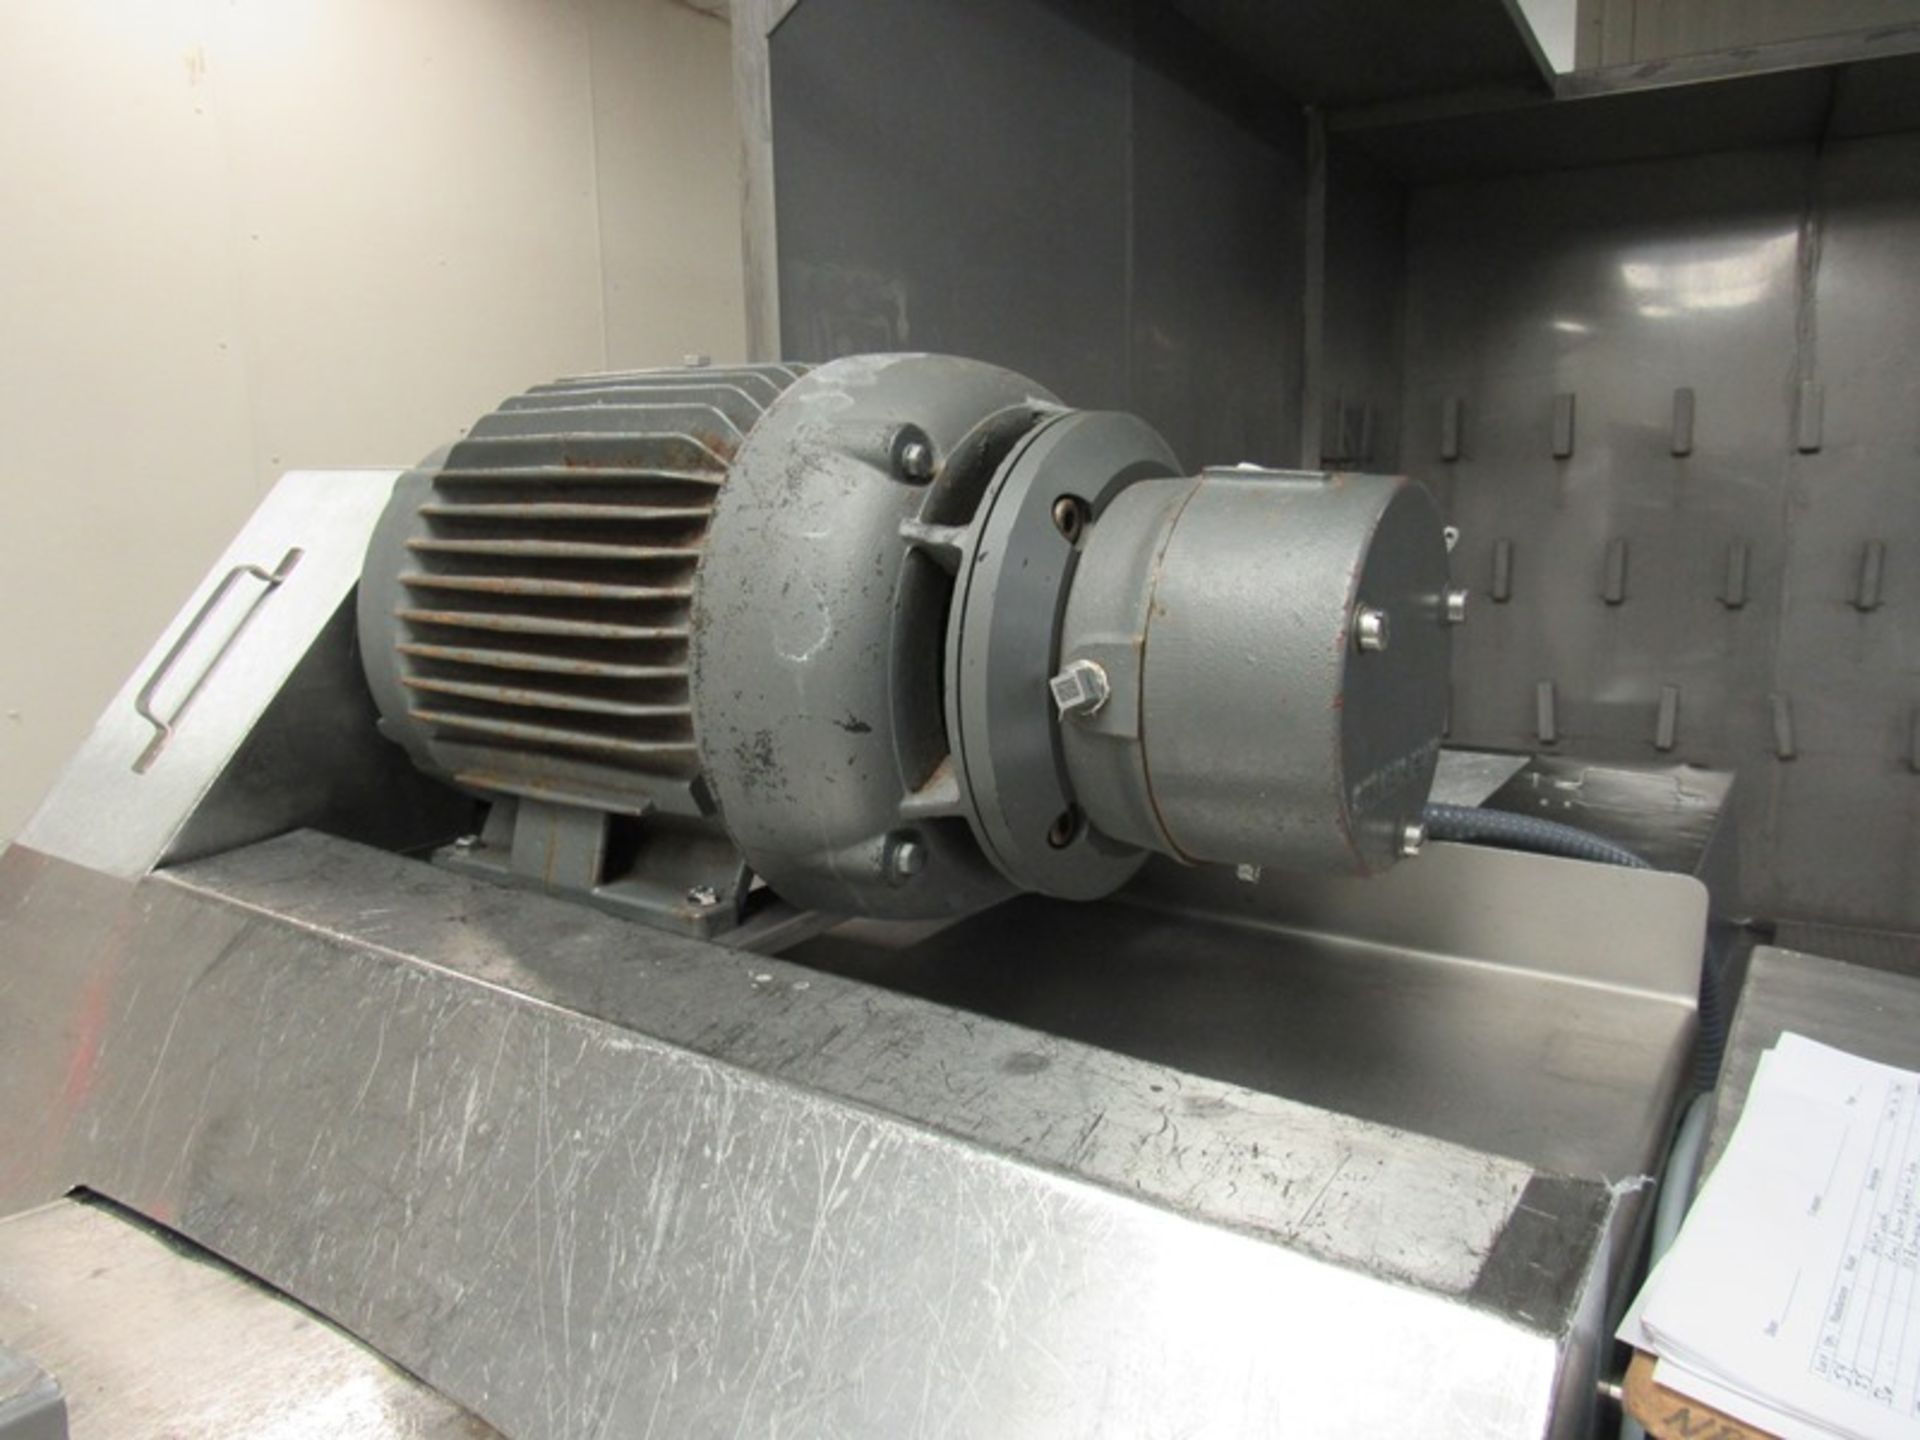 Portable Urschel Mdl. J9-A Stainless Steel Dicer, Ser. #1246, 5 h.p., 230/460 volts, 3 phase ( - Image 2 of 6